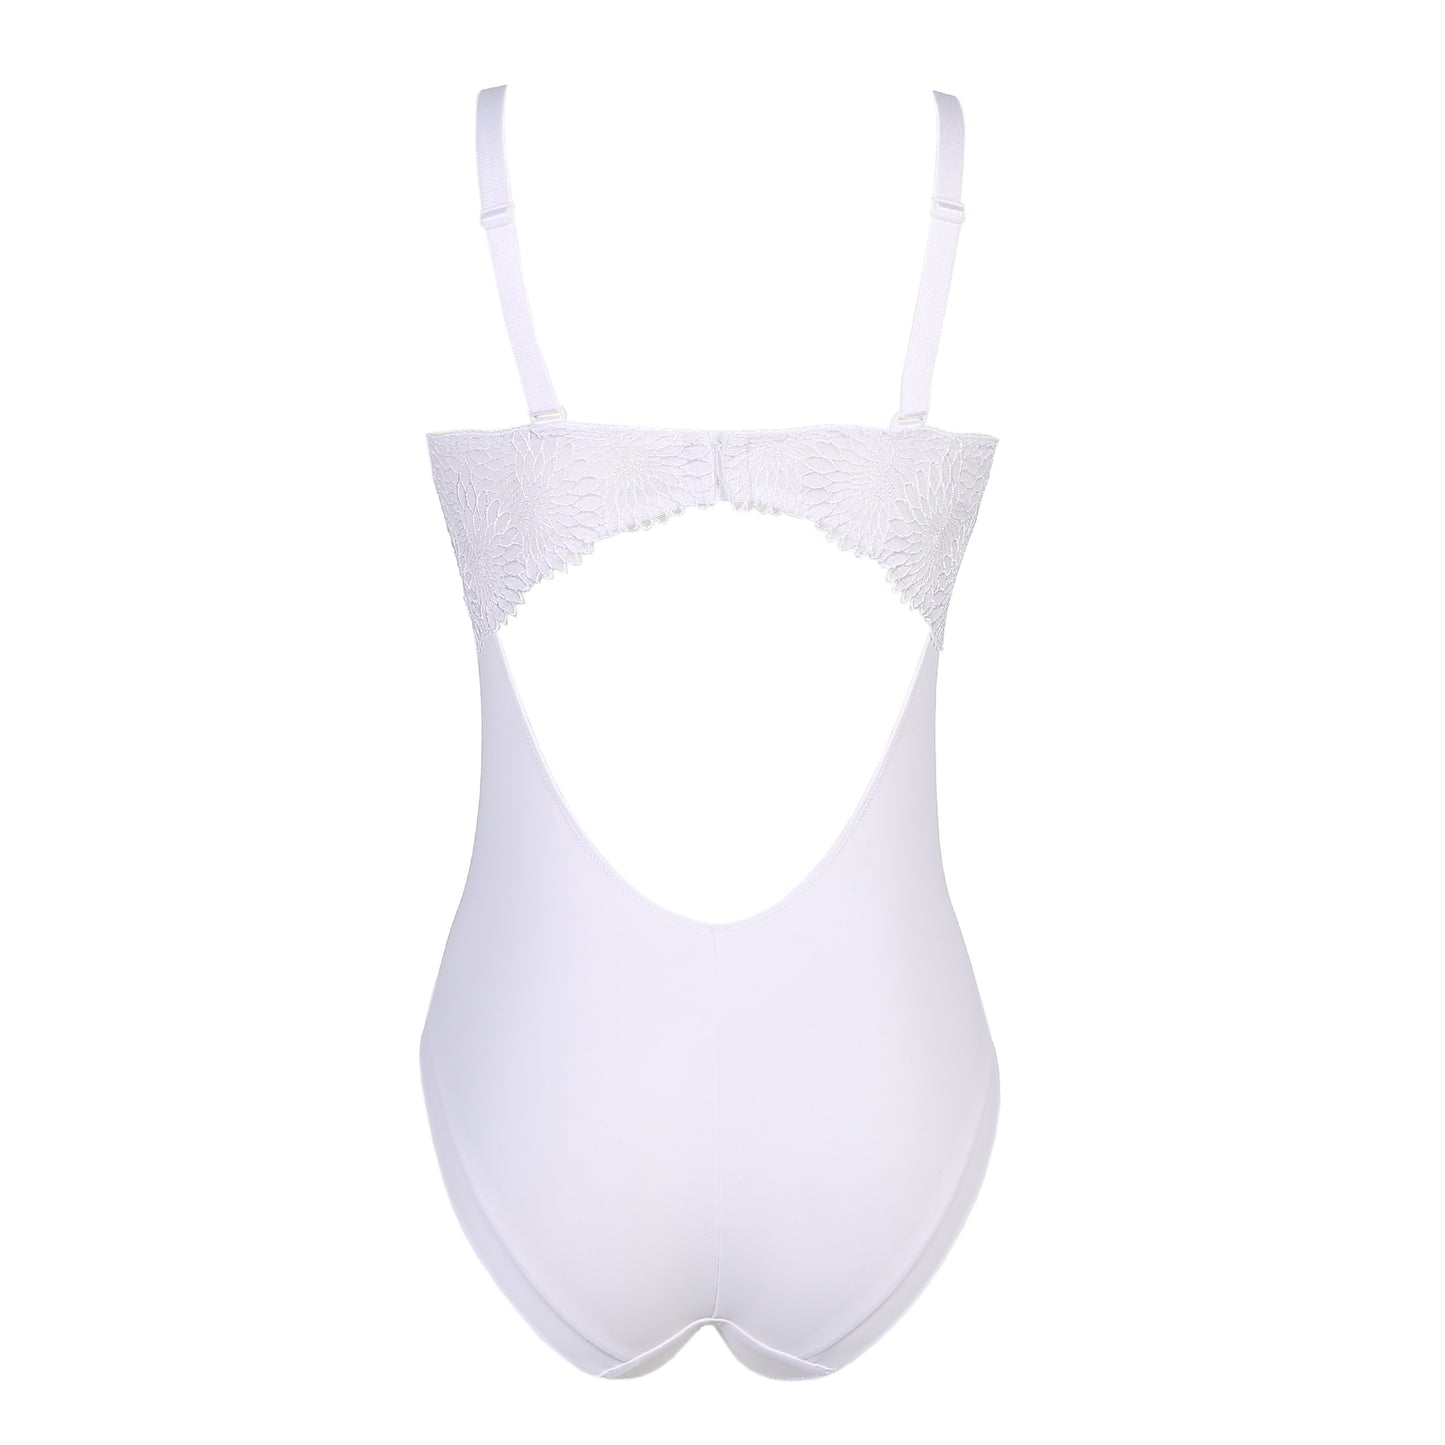 Back view of a DD+ open back bodysuit with built in full support underwire bra in white by Primadonna.